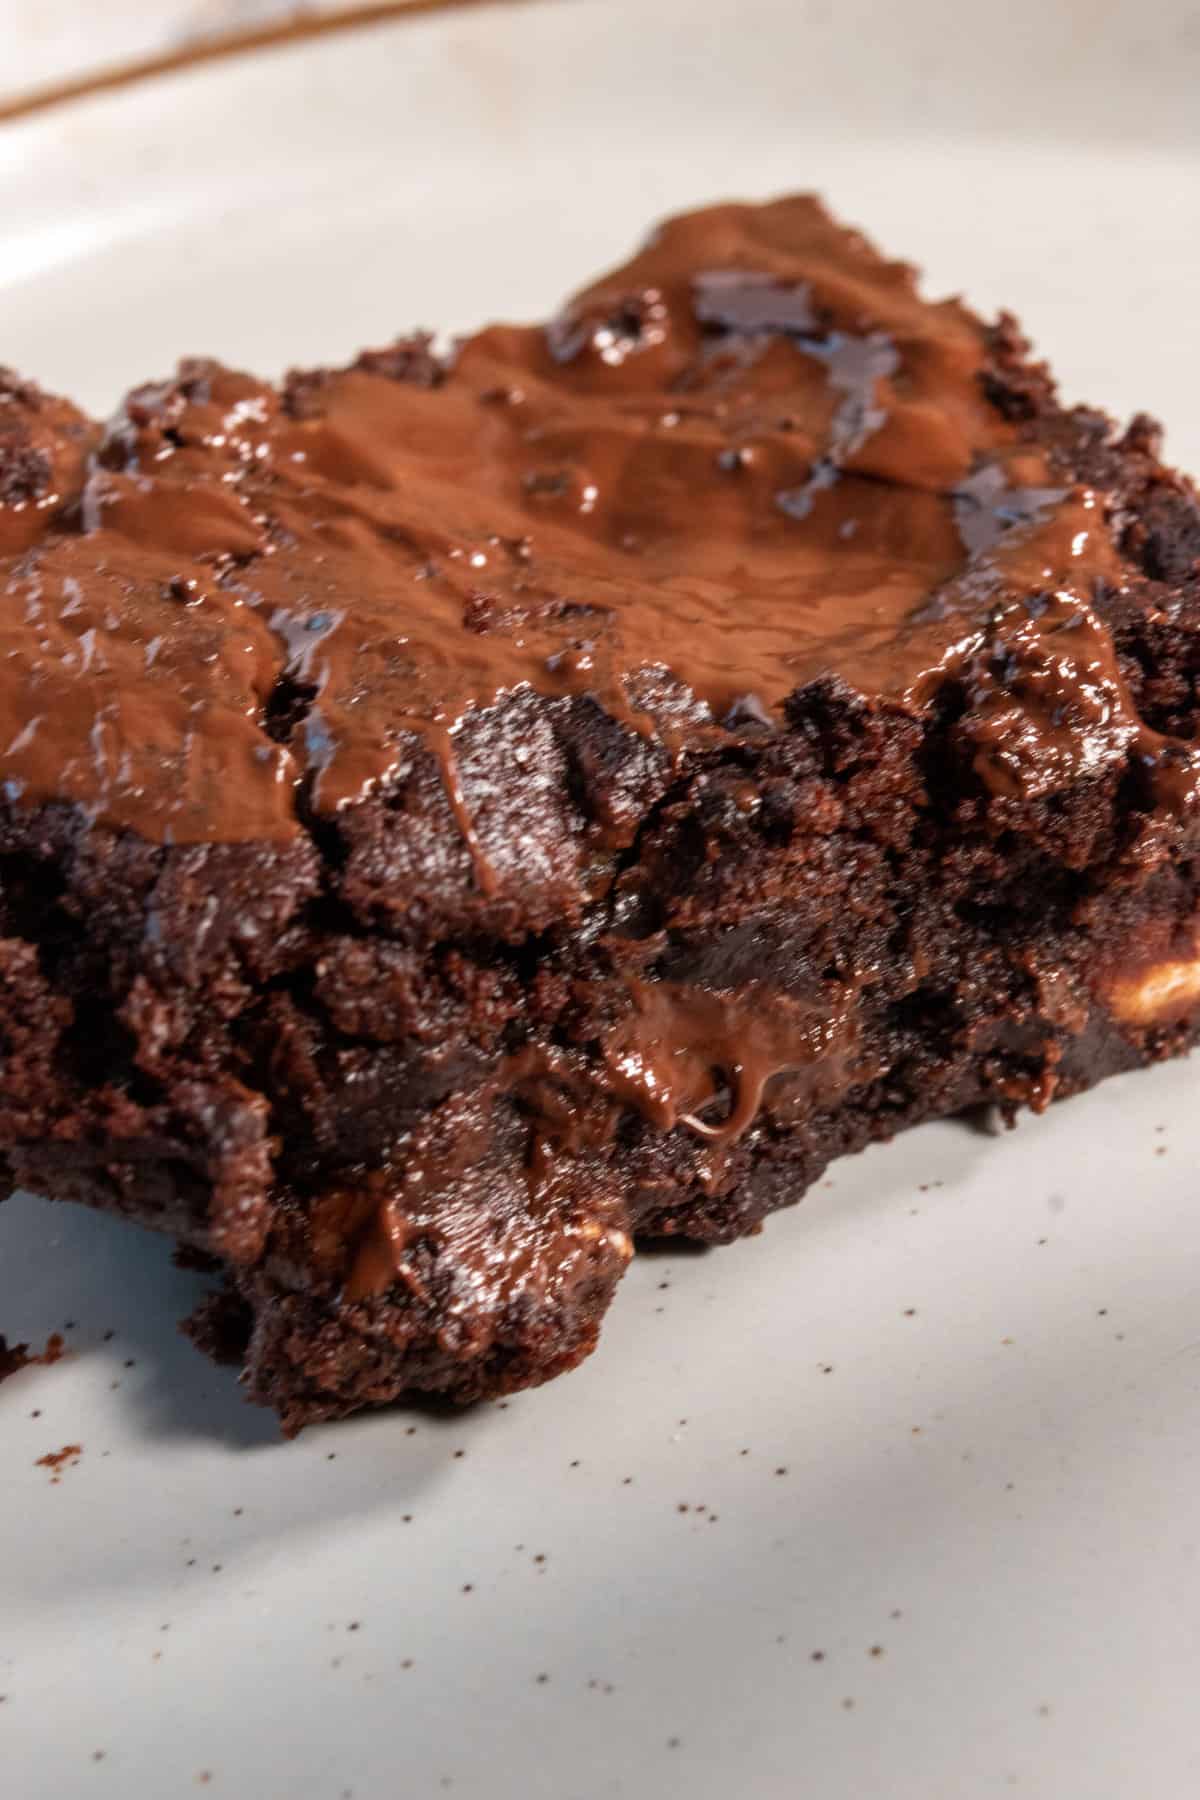 A moist, chocolatey piece of brownie sitting on a white serving platter.